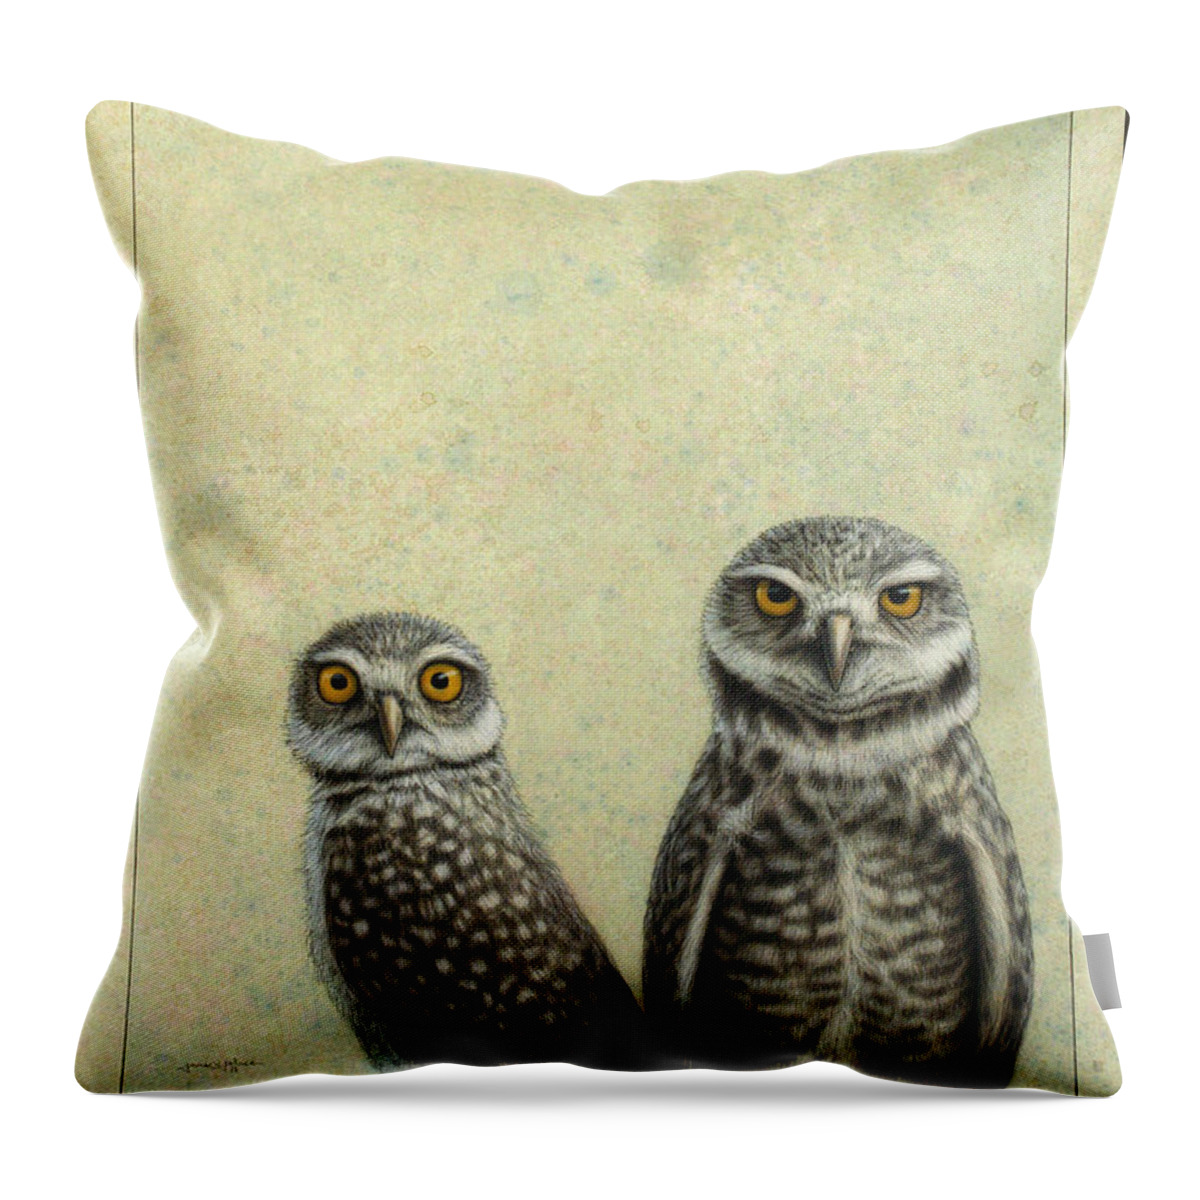 Owls Throw Pillow featuring the painting Burrowing Owls by James W Johnson